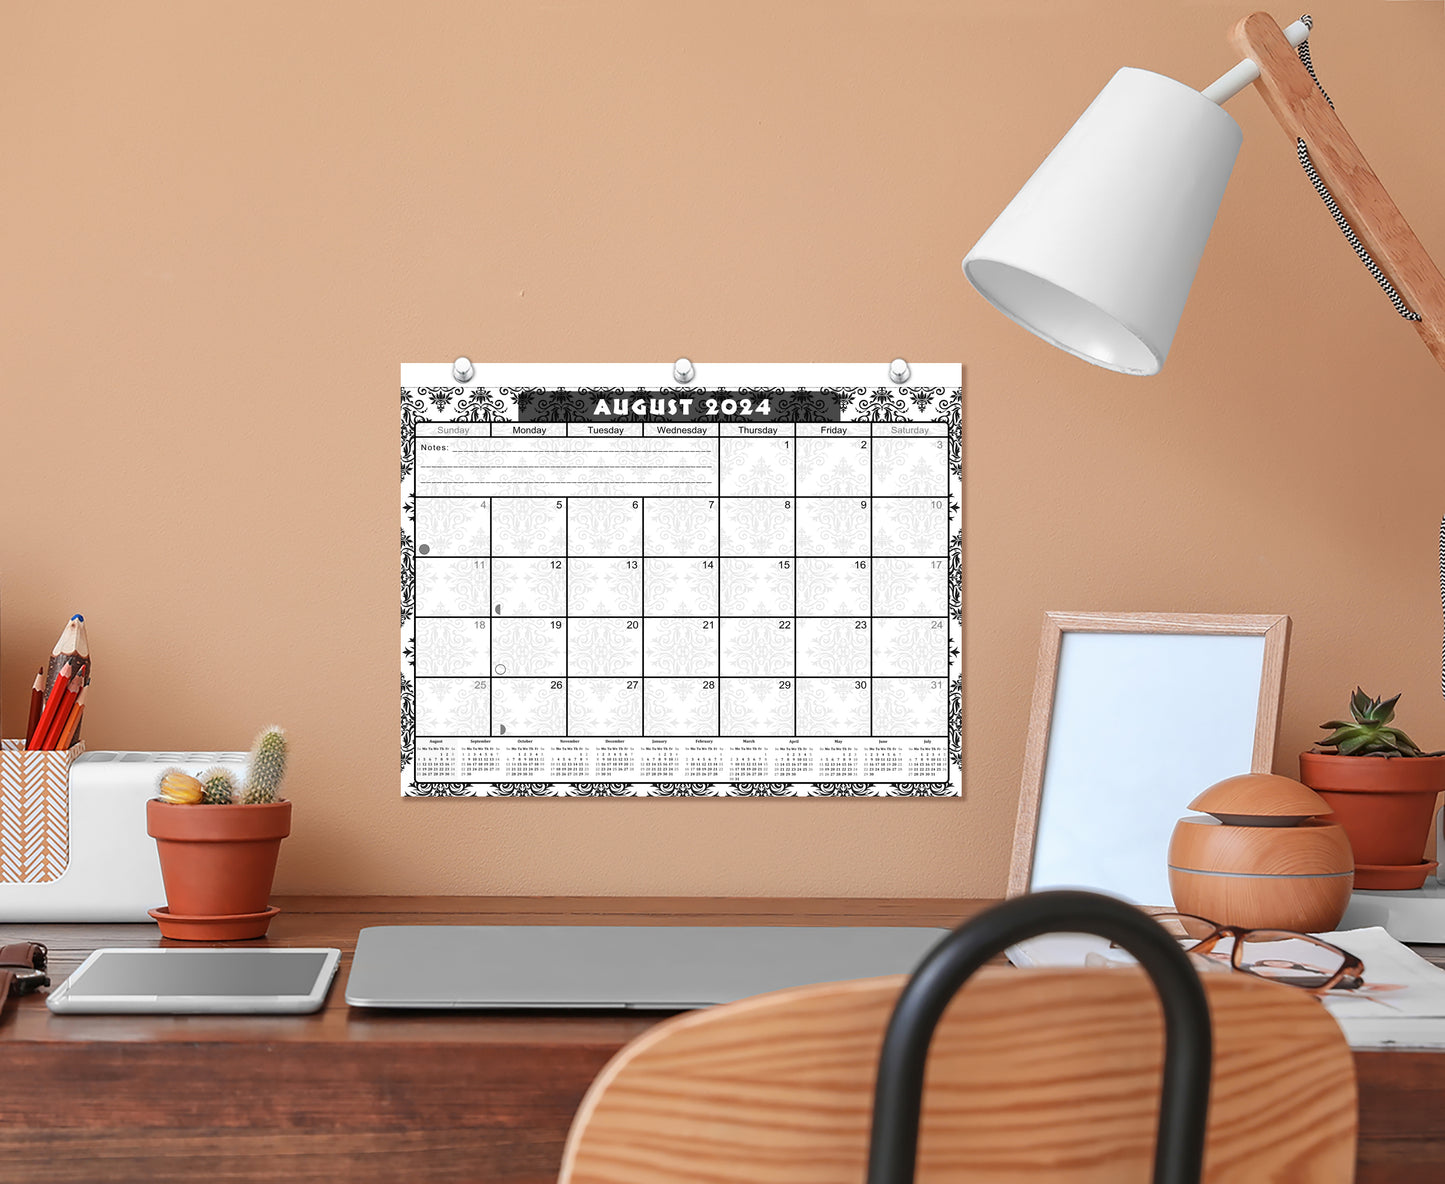 2024-2025 Academic Year 12 Months Student Calendar/Planner for 3-Ring Binder, Desk or Wall (Black & White Damask - Edition #009)